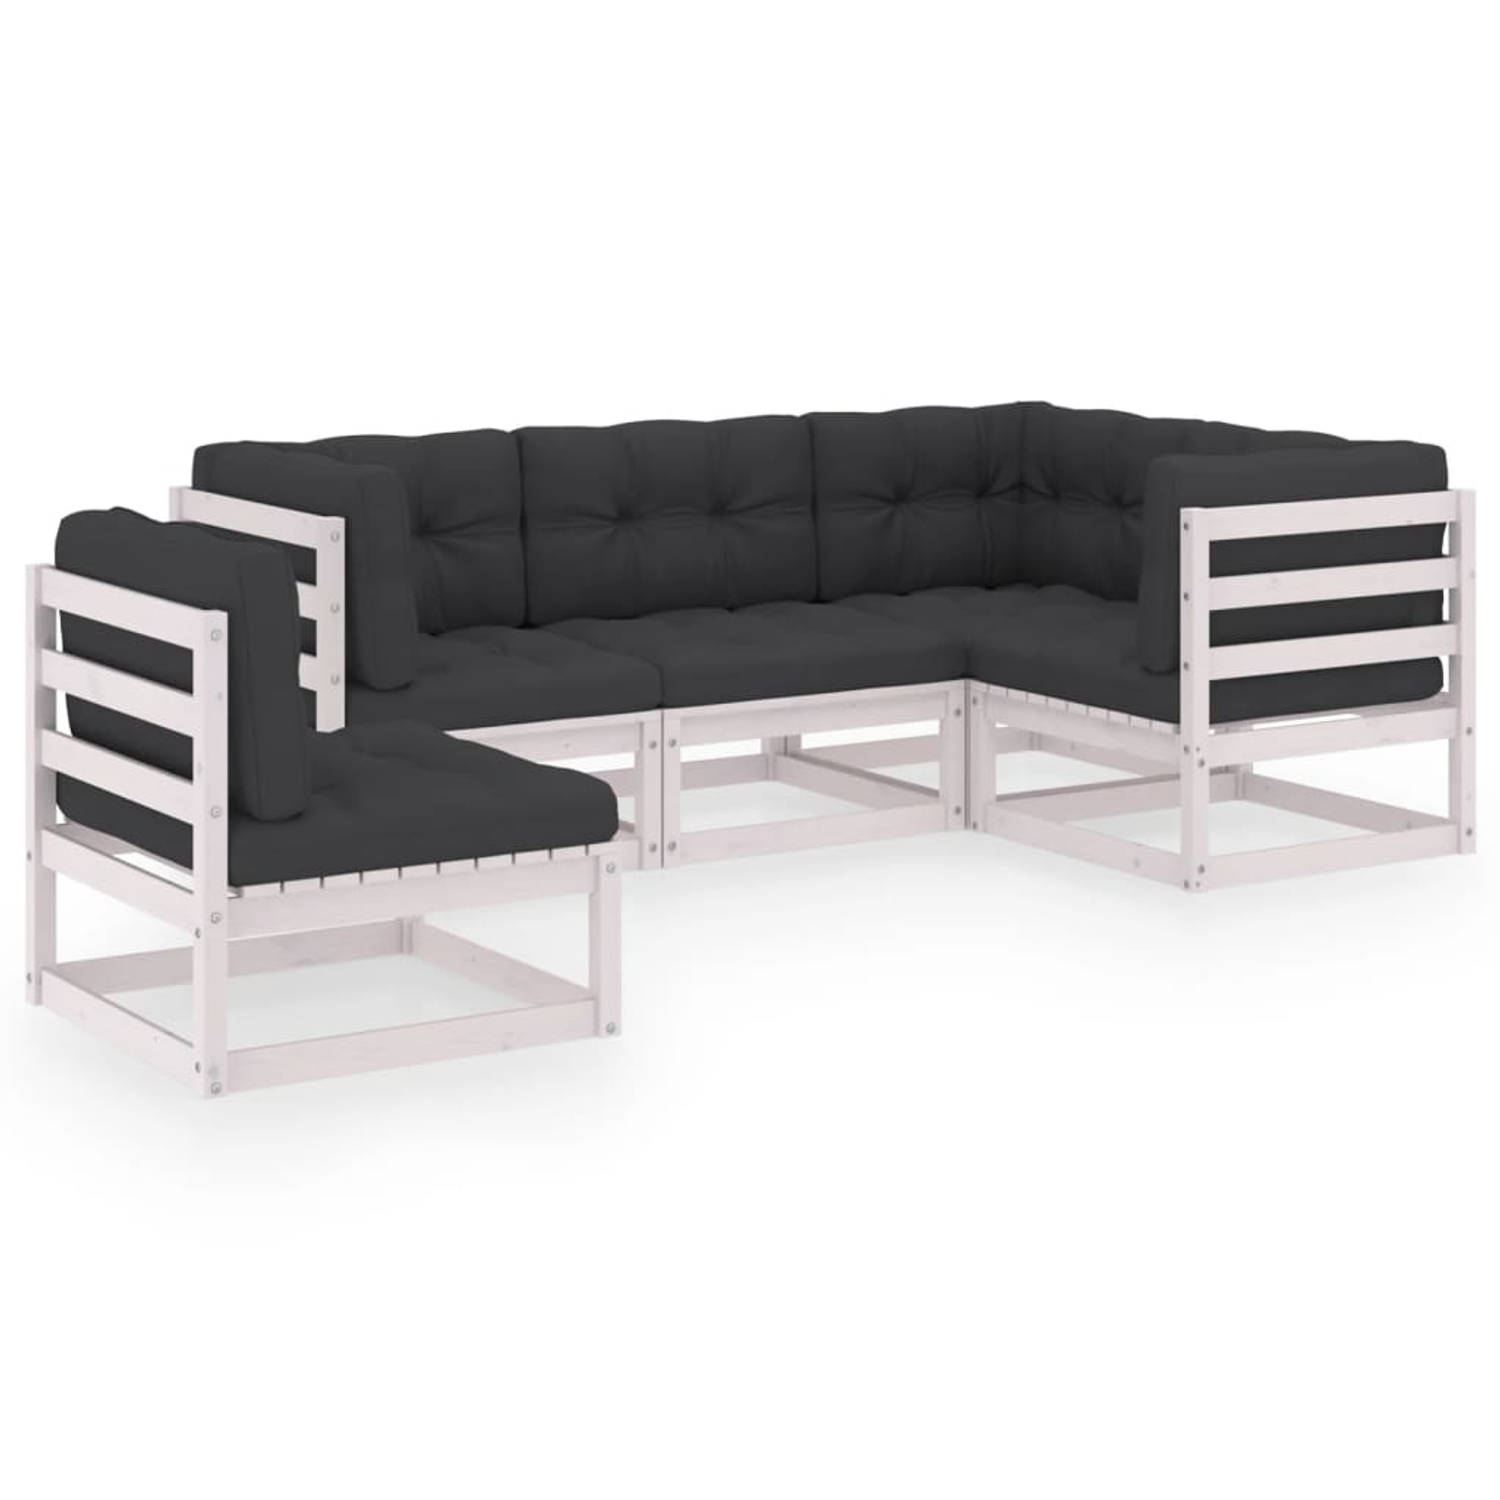 The Living Store Loungeset - Grenenhout - Wit - 70x70x67 cm - Antraciete kussens